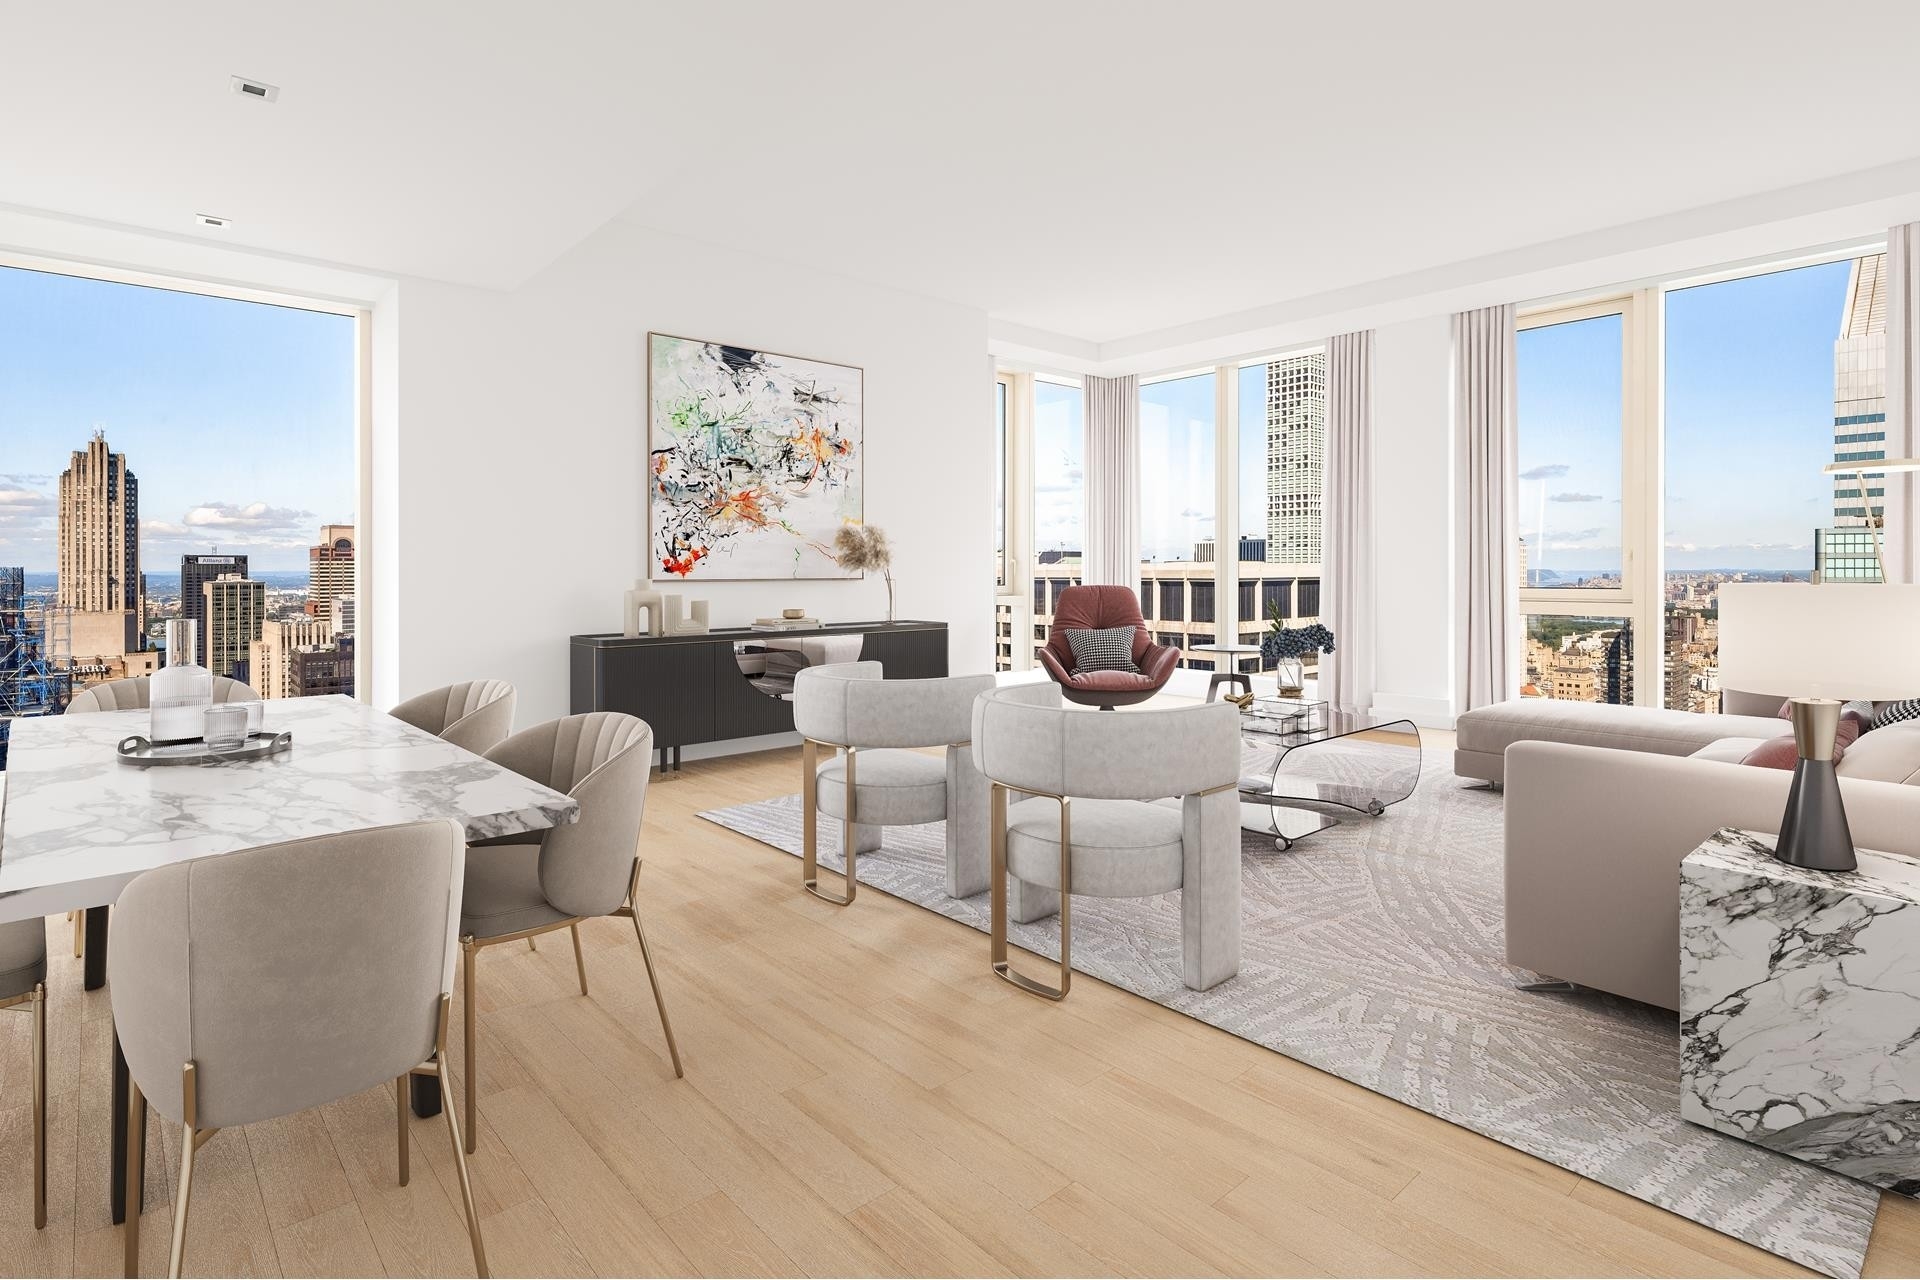 Property at The Centrale Condo, 138 E 50TH ST, 62 Turtle Bay, New York, New York 10022